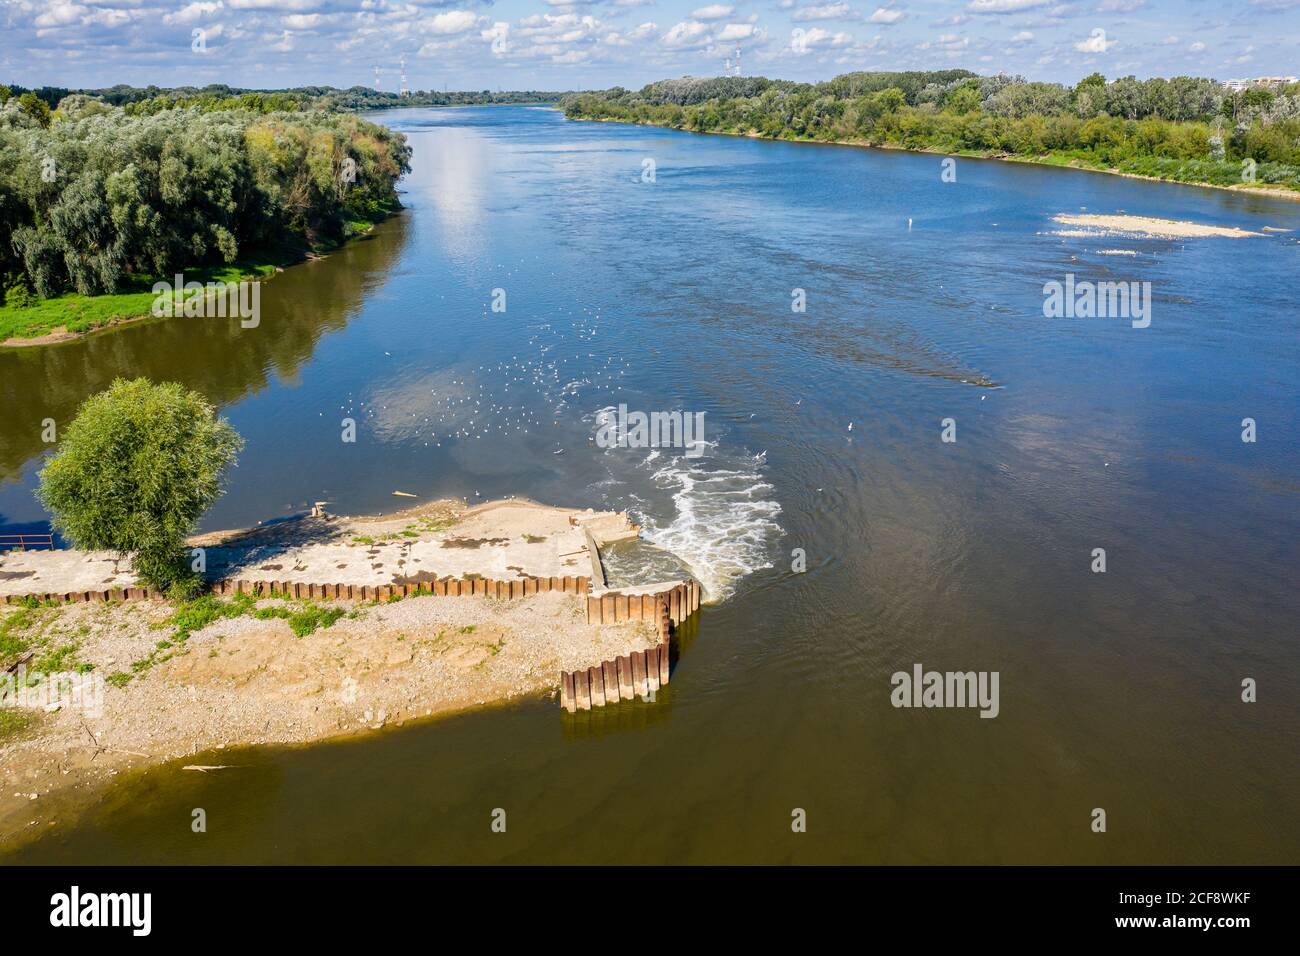 Discharge of sewage into the river, ecological disaster after failure of the sewage treatment plant, Warsaw, Poland Stock Photo